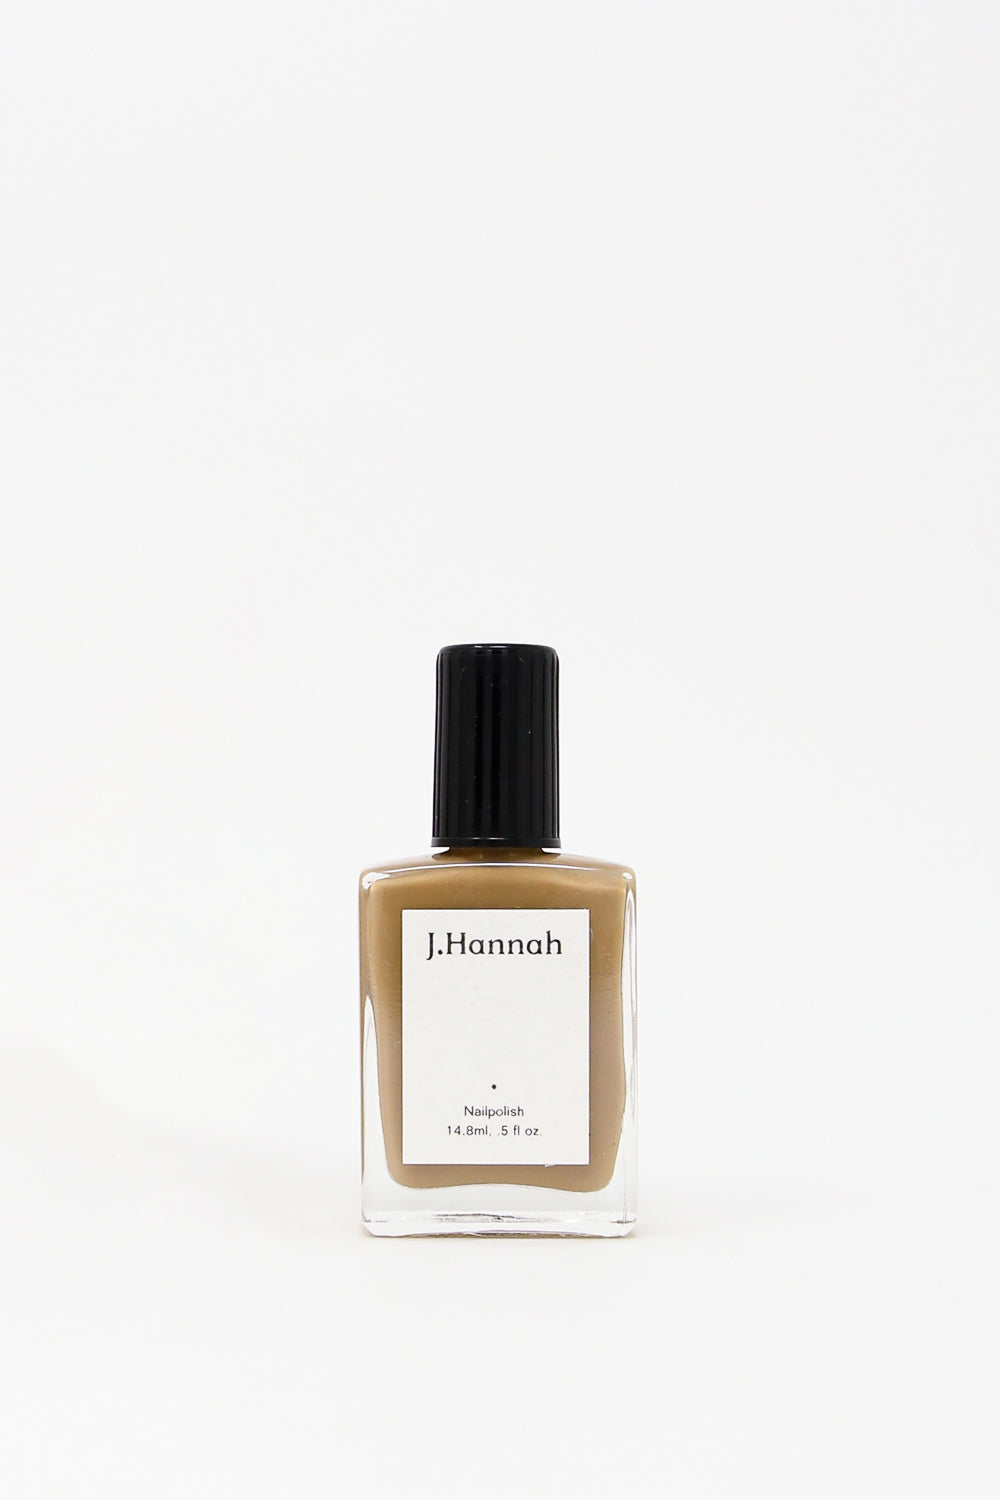 J Hannah Nail Polish in Dune (Brown/Earth Tone). Image of single nail polish against a wide background.